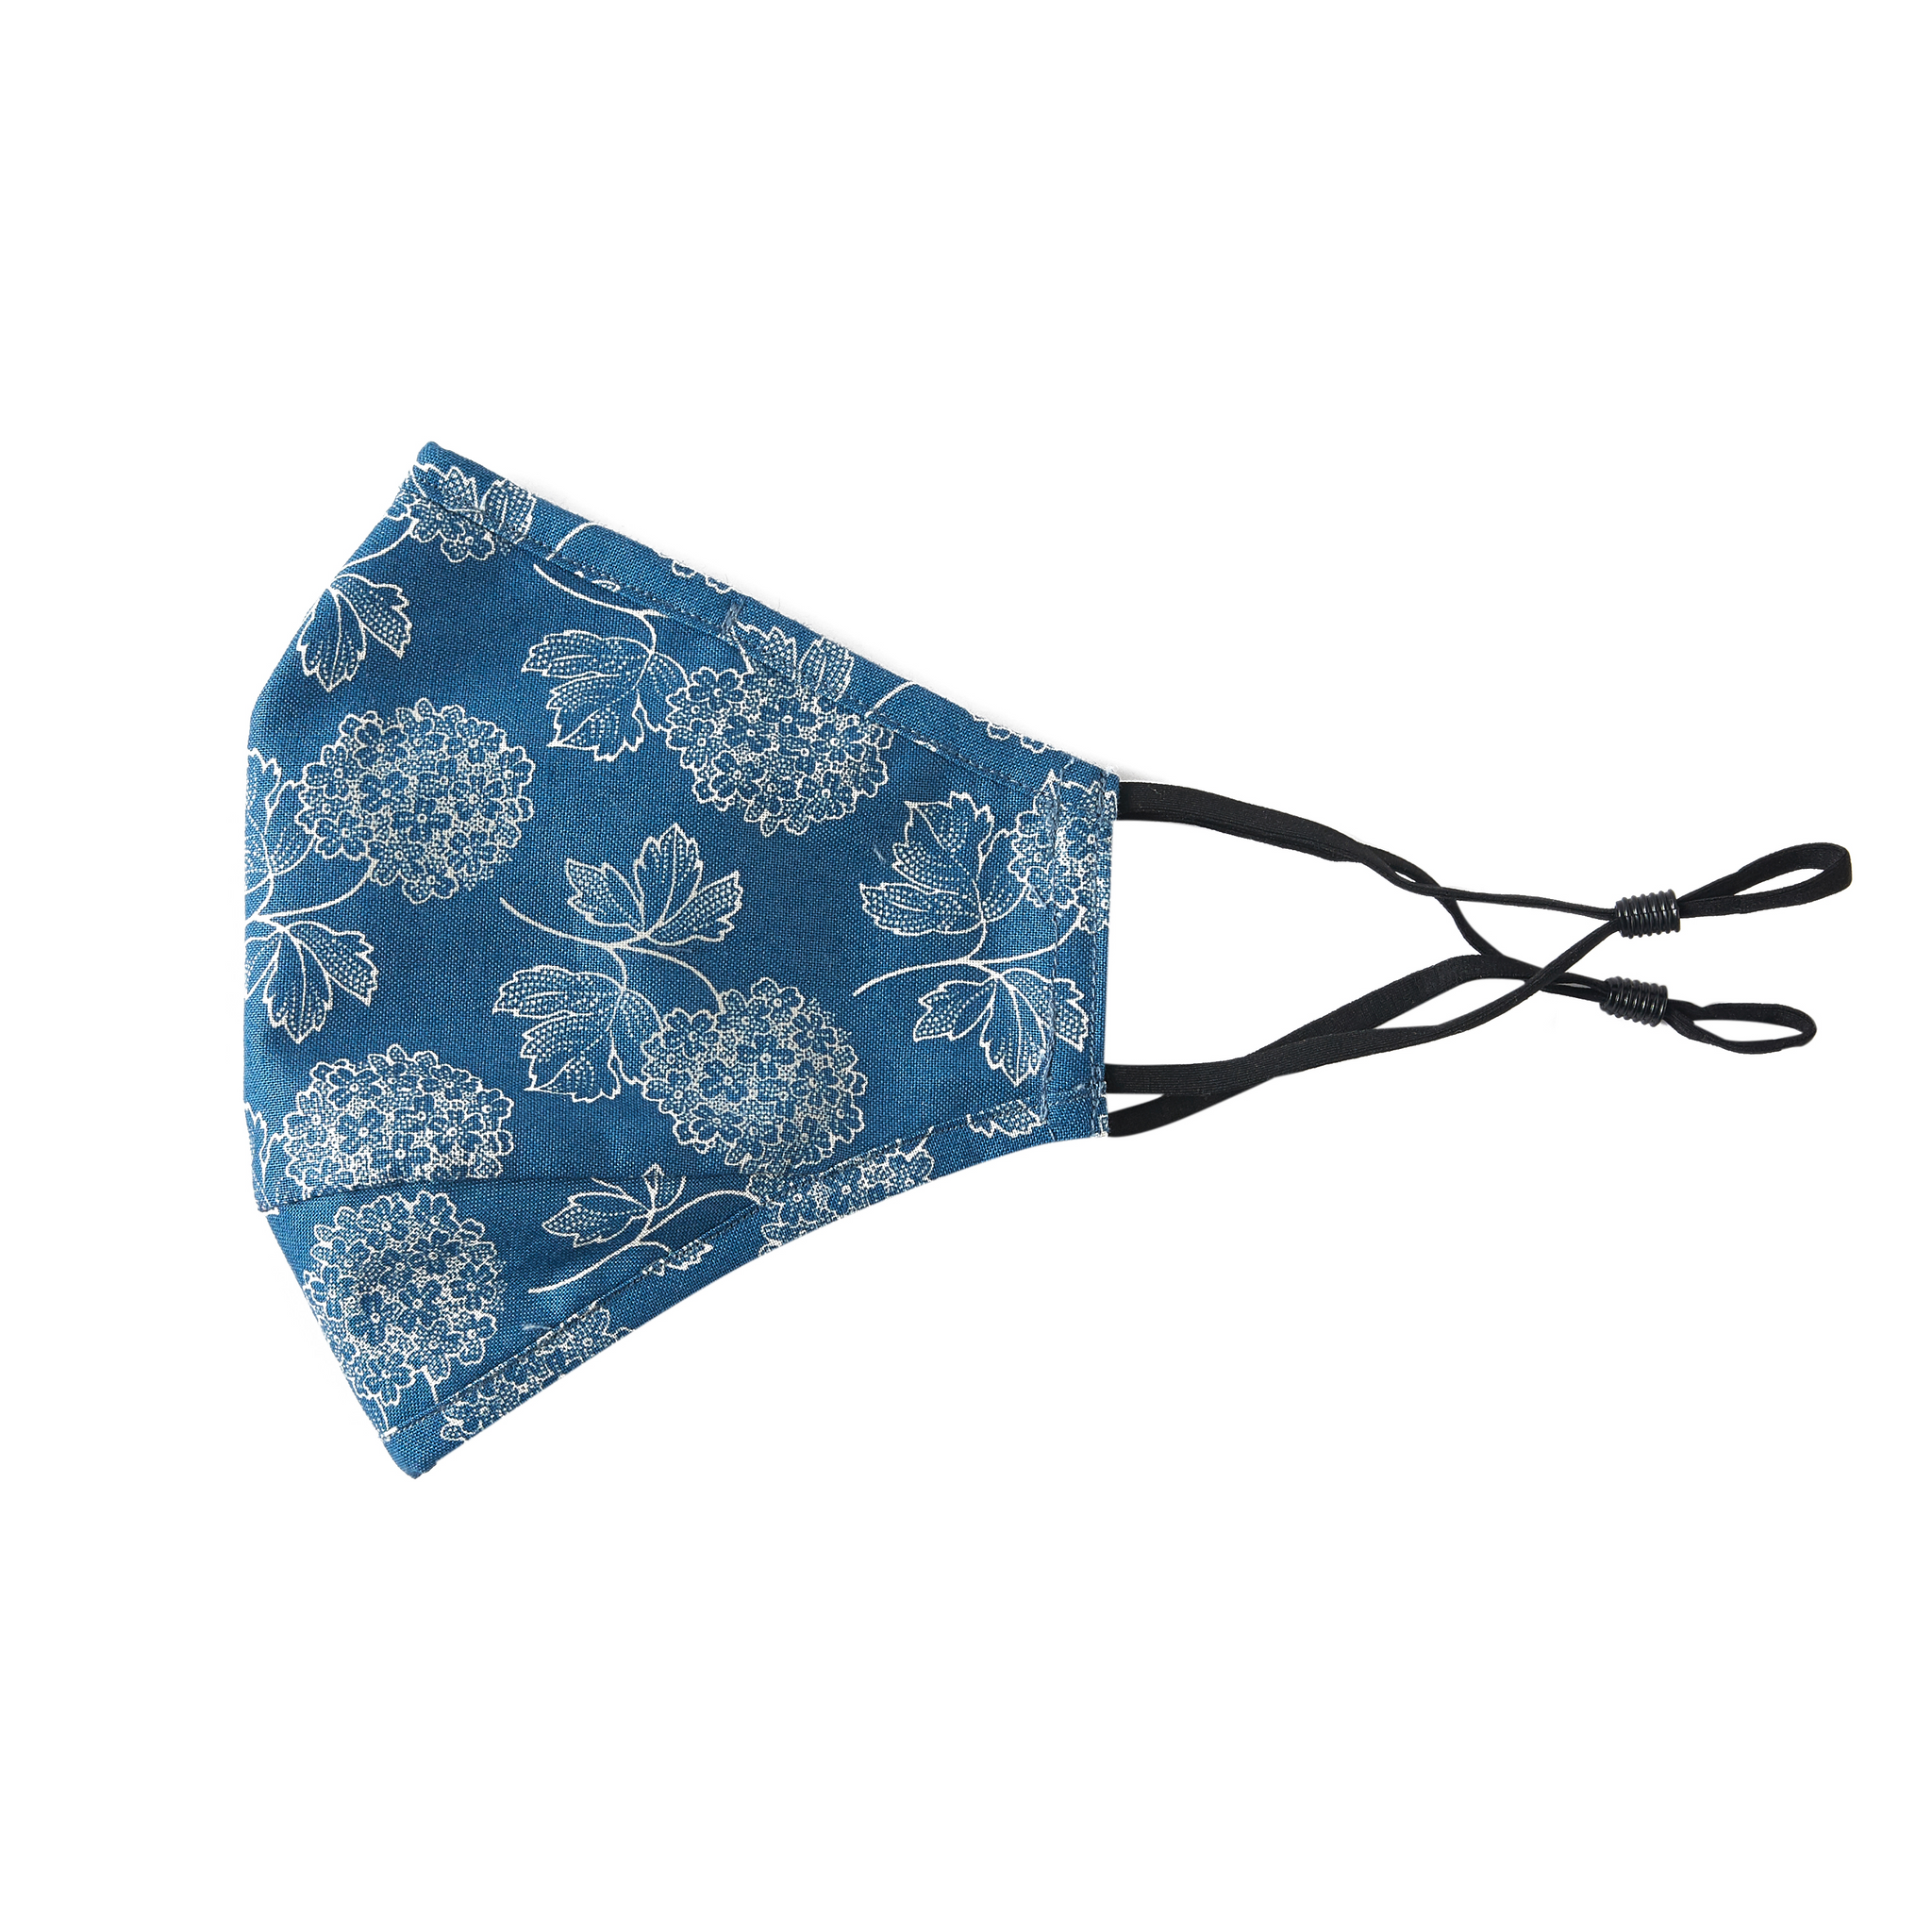 Blue Hydrangeas | Two Silk One Cotton Triple Layer Face Mask | Mulberry Silk | Insert Pocket, PM 2.5 Filter & Nose Wire